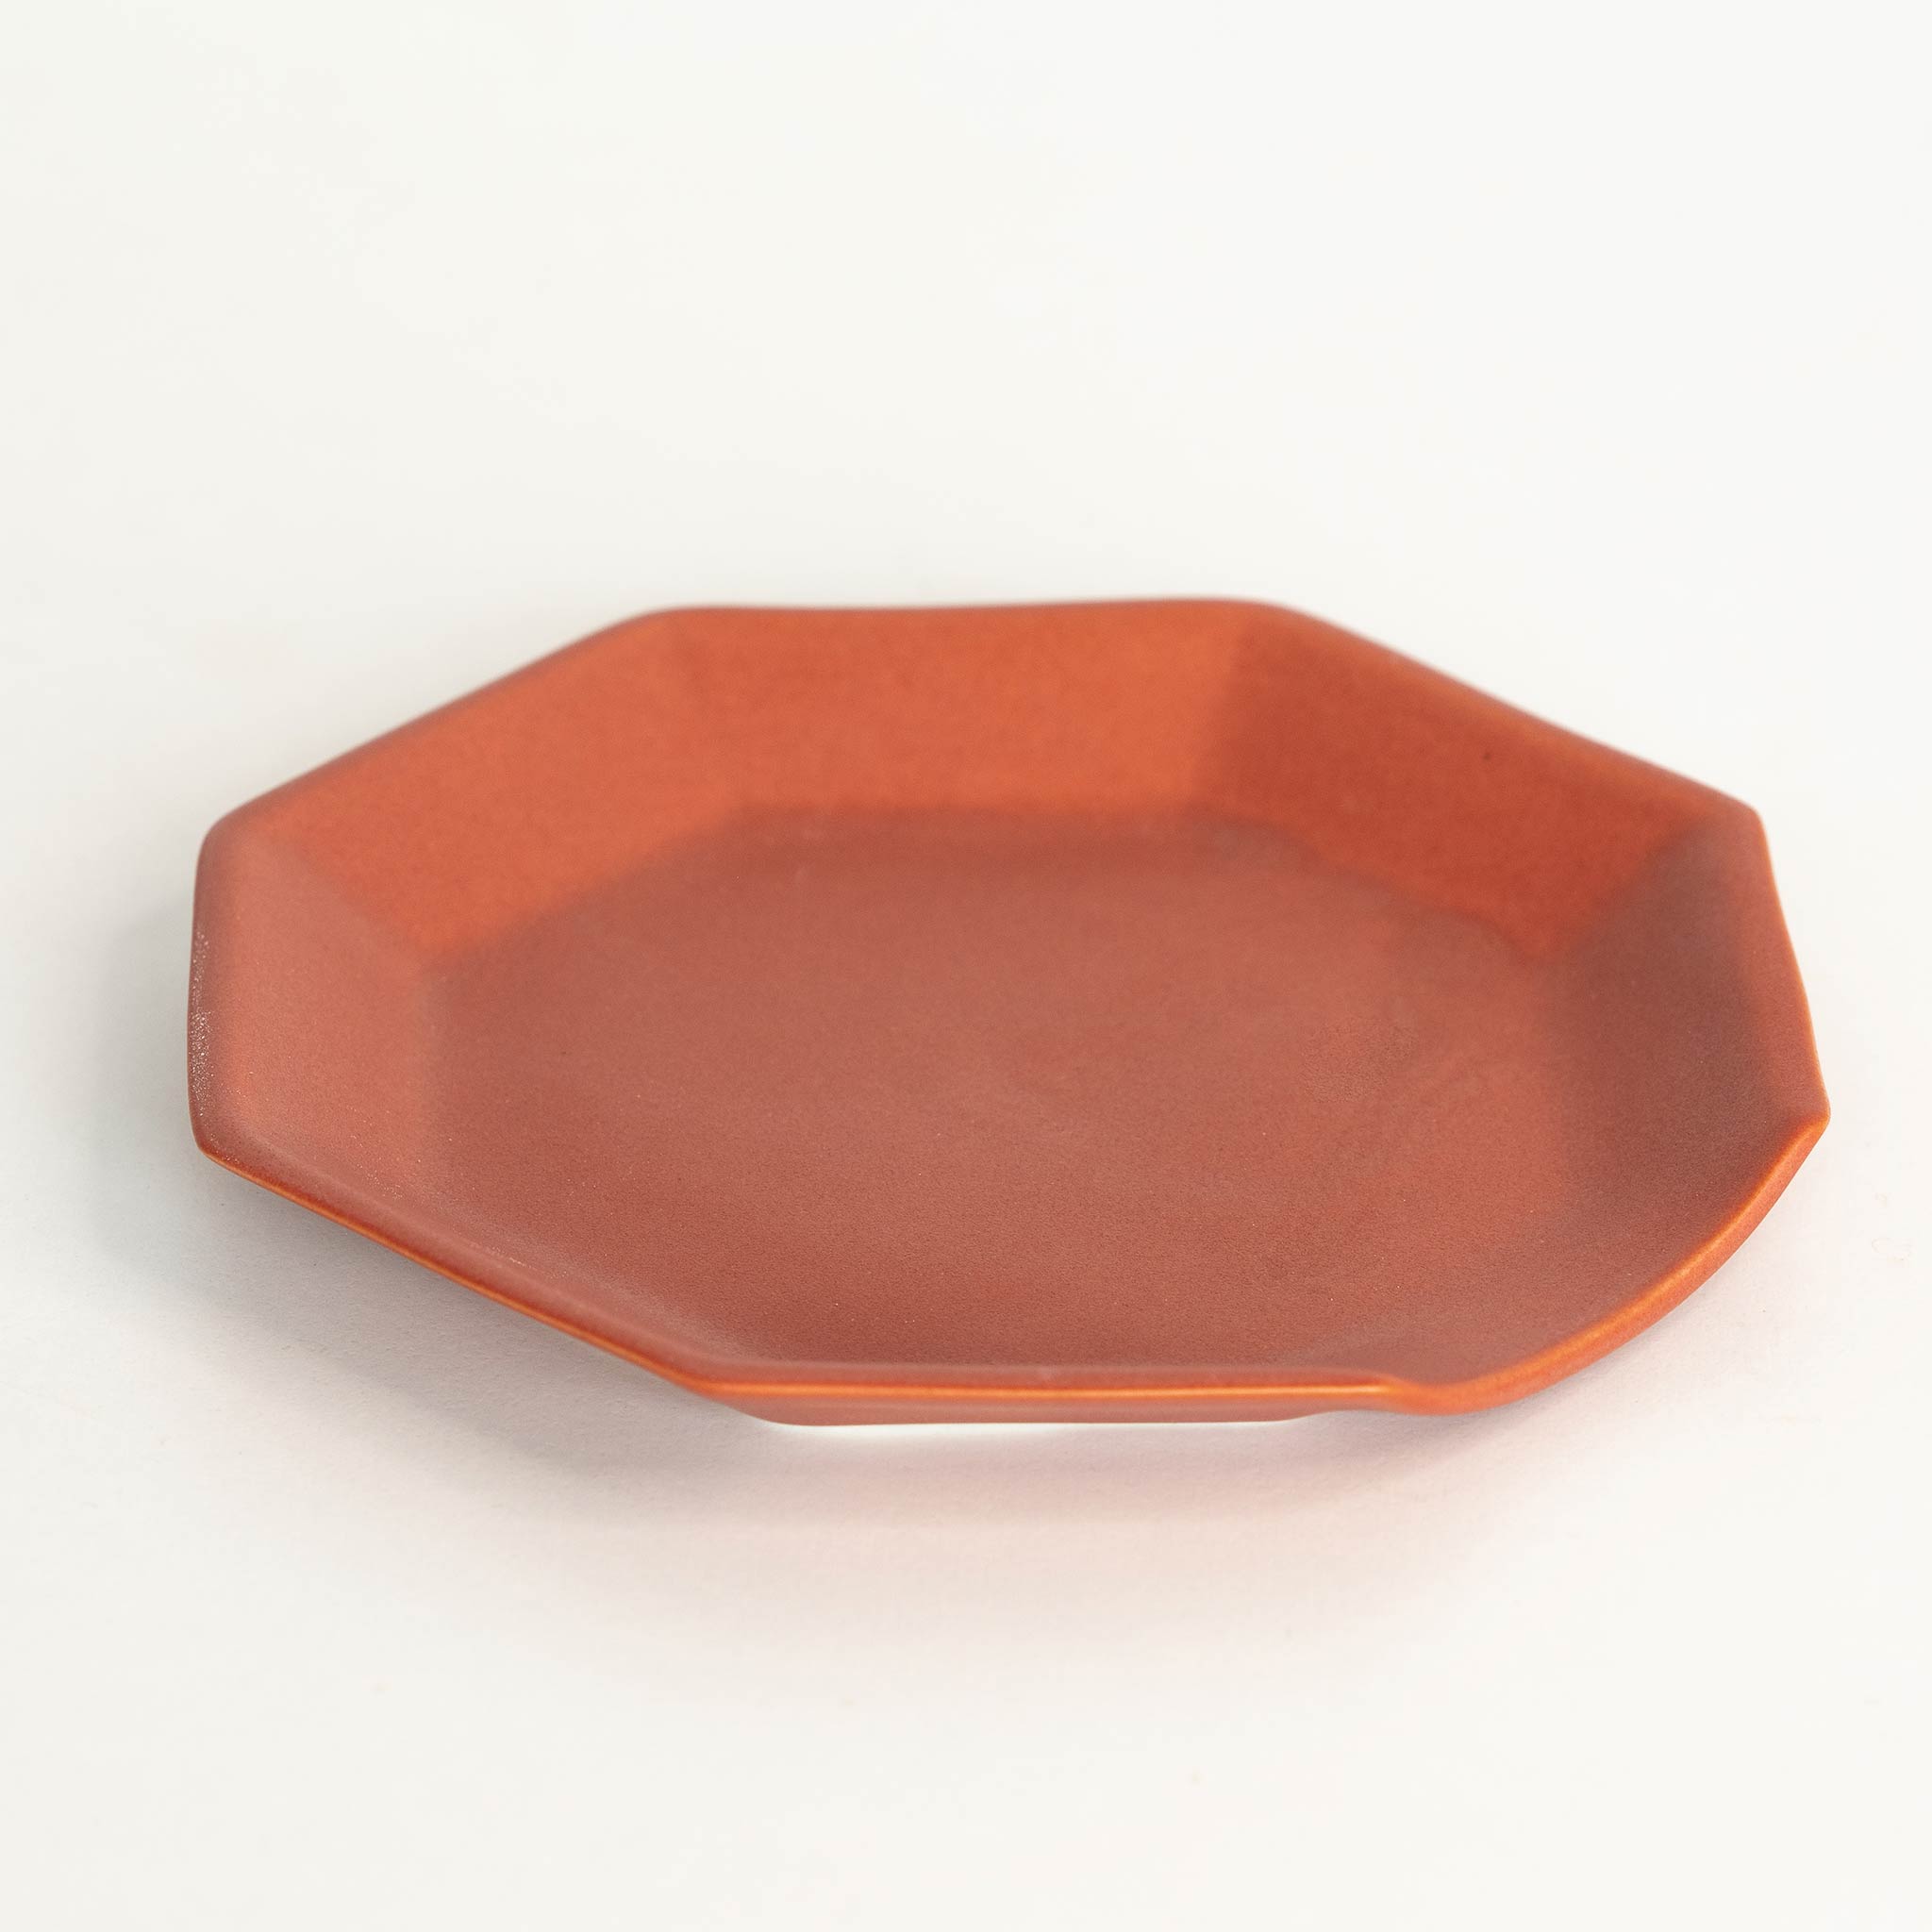 Handmade Porcelain Spoon Rest Terracotta Red The Bright Angle